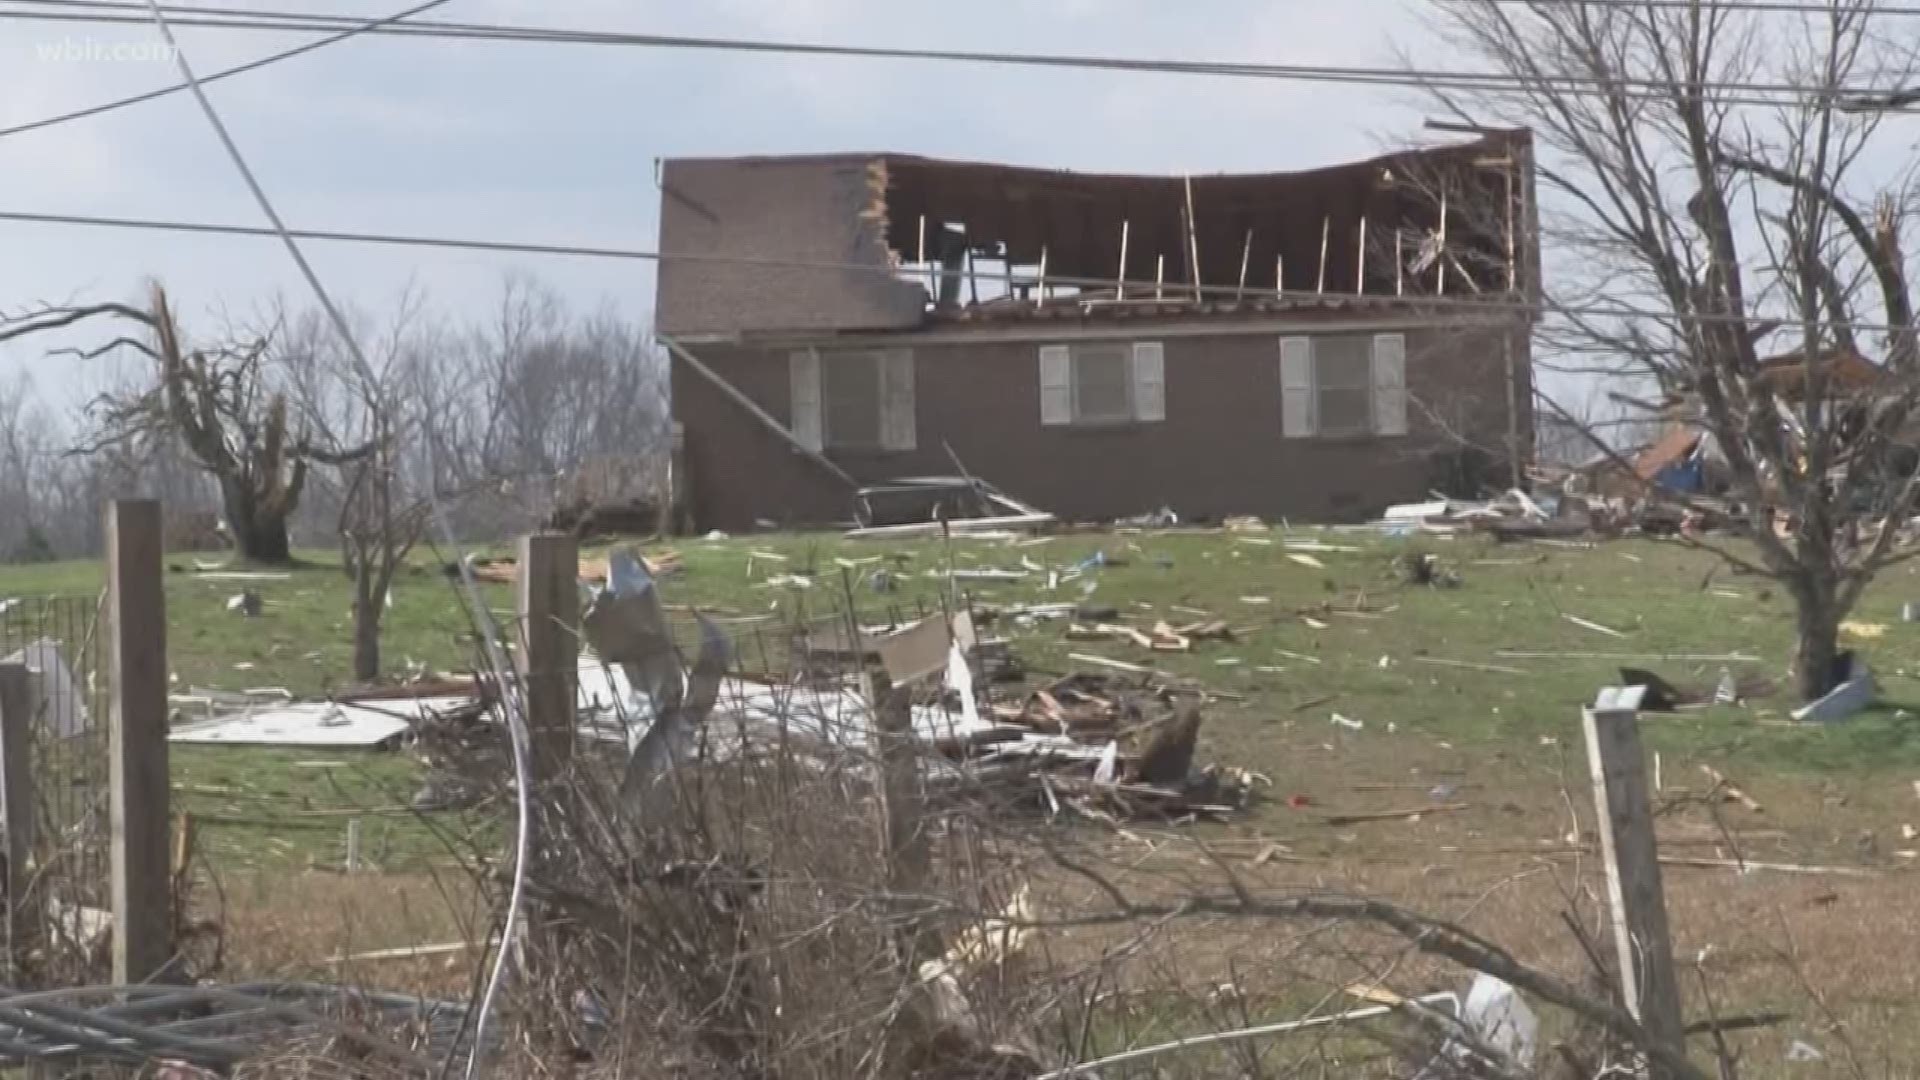 The tornado hit in the middle of the night and officials said most people didn't have time to take cover.